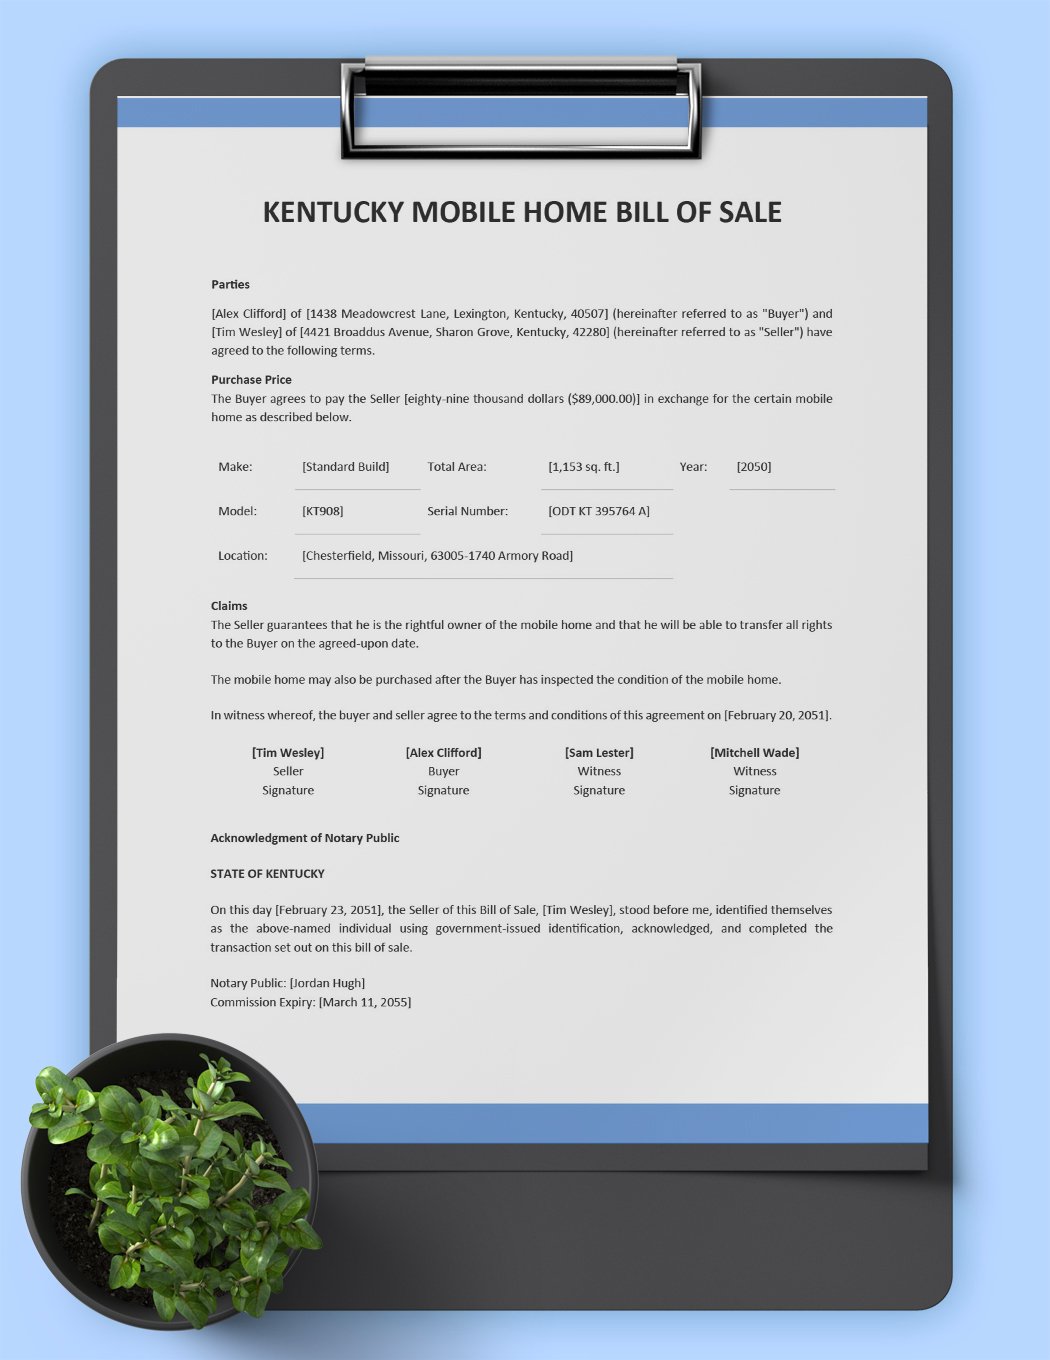 Kentucky Mobile Home Bill of Sale Template